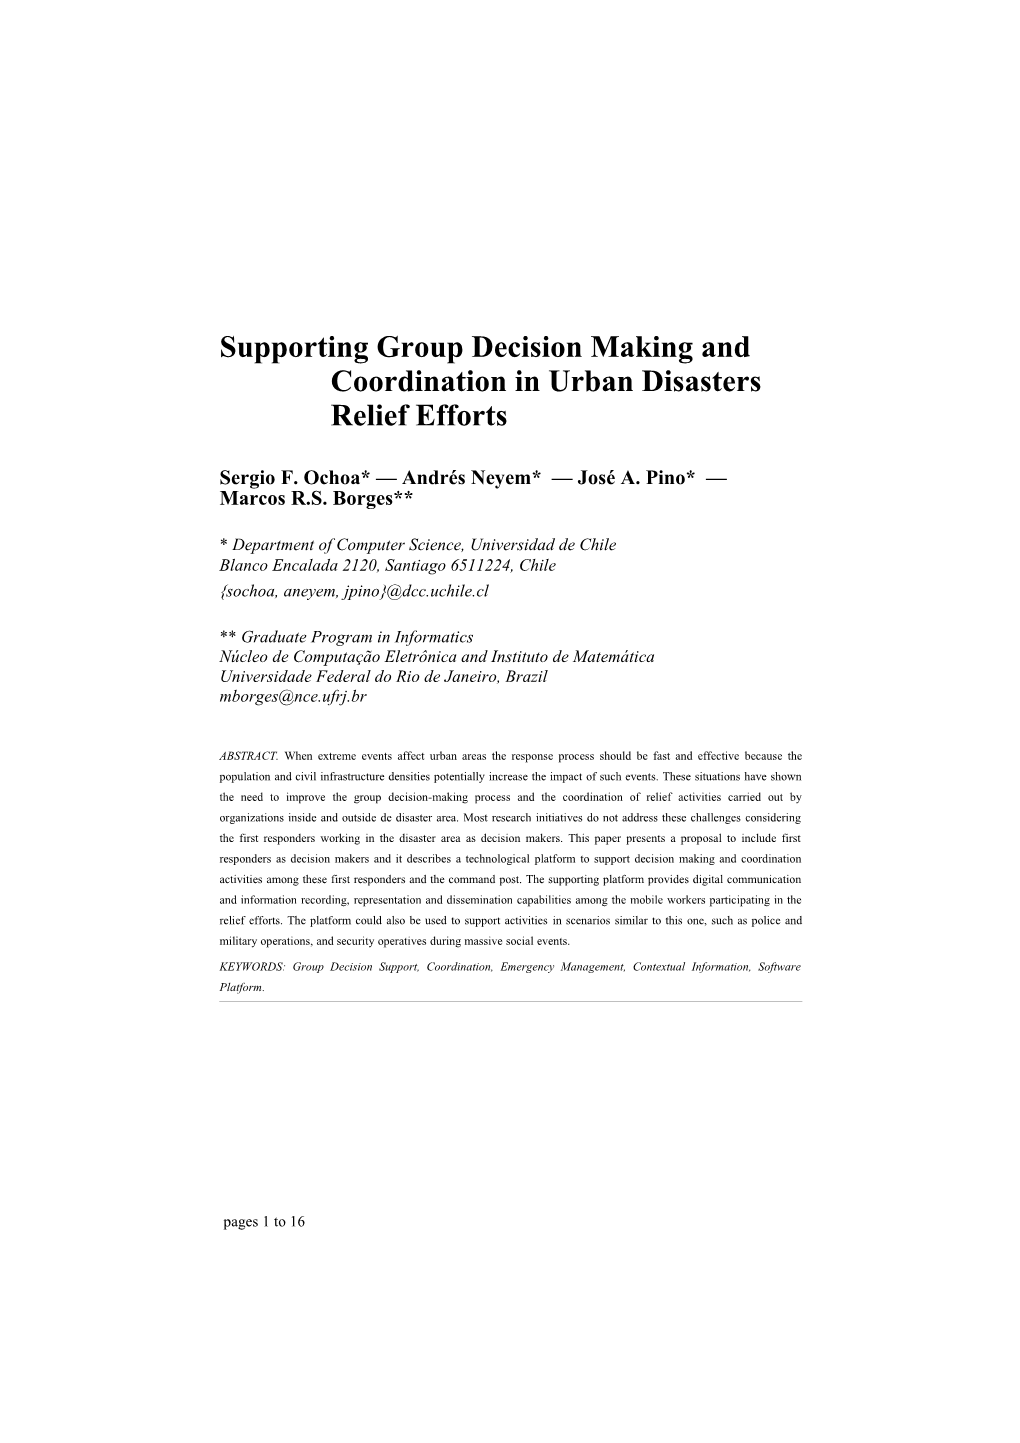 Supporting Group Decision Making and Coordination in Urban Disasters Relief Efforts